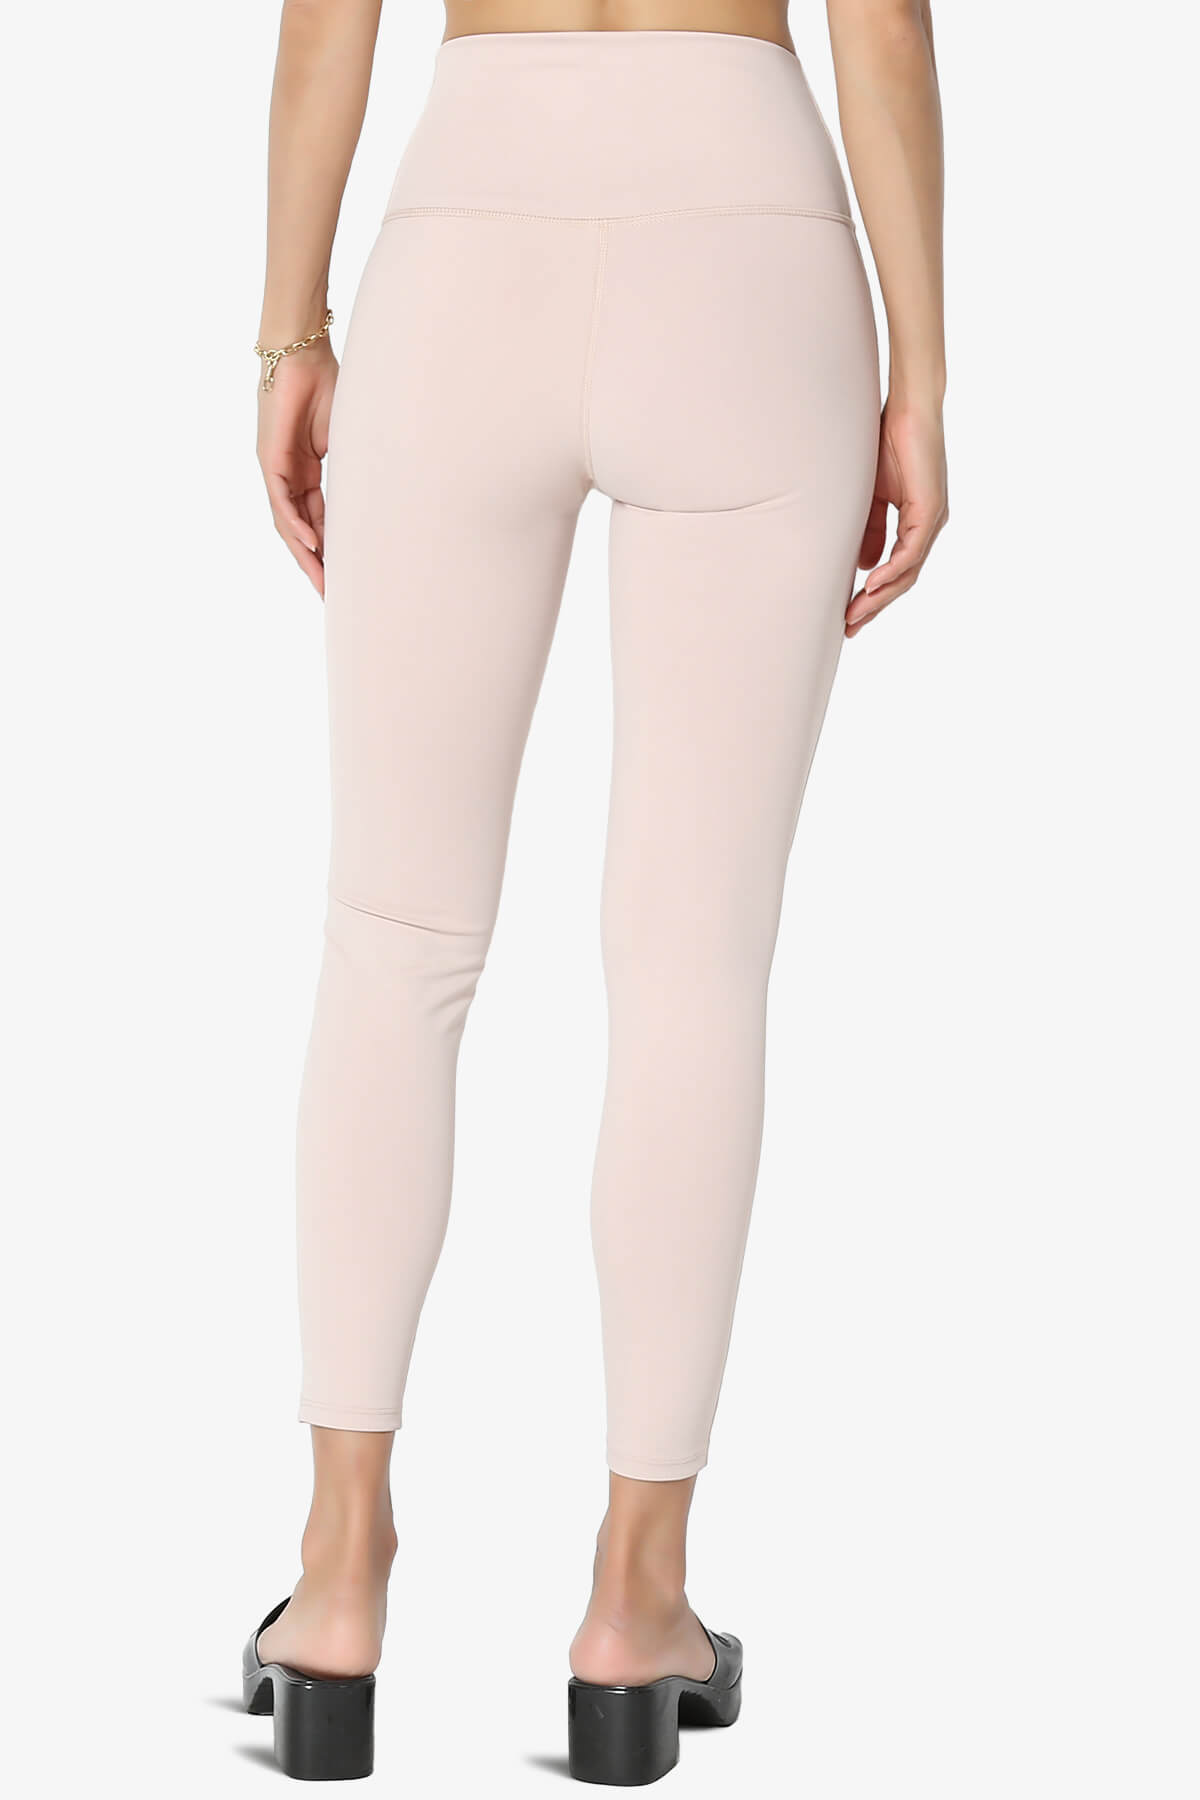 Load image into Gallery viewer, Mosco Athletic Tummy Control Workout Leggings DUSTY BLUSH_2
